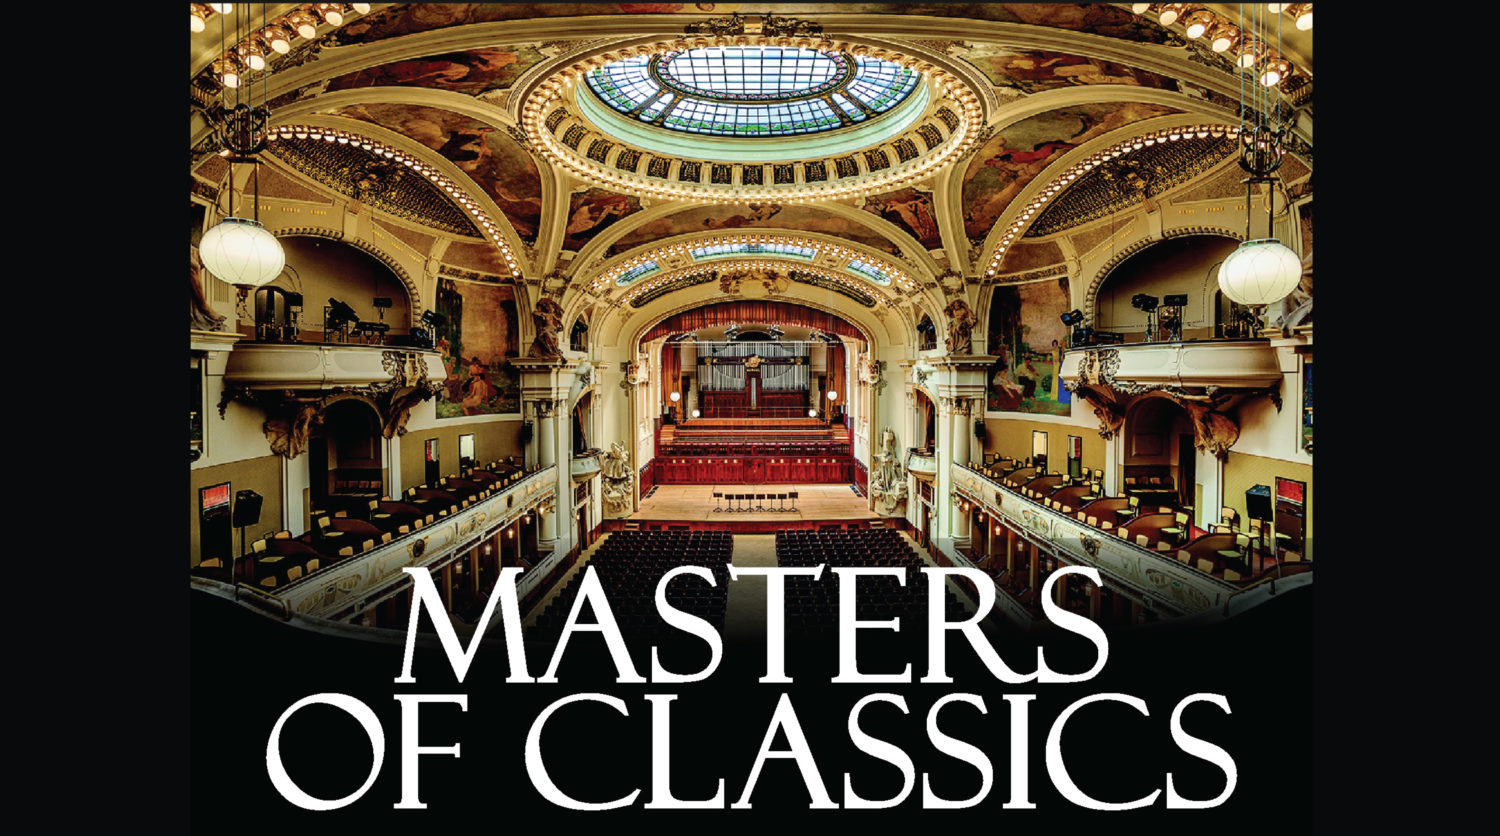 MASTERS OF CLASSICS IN THE MUNICIPAL HOUSE 09.01.2020